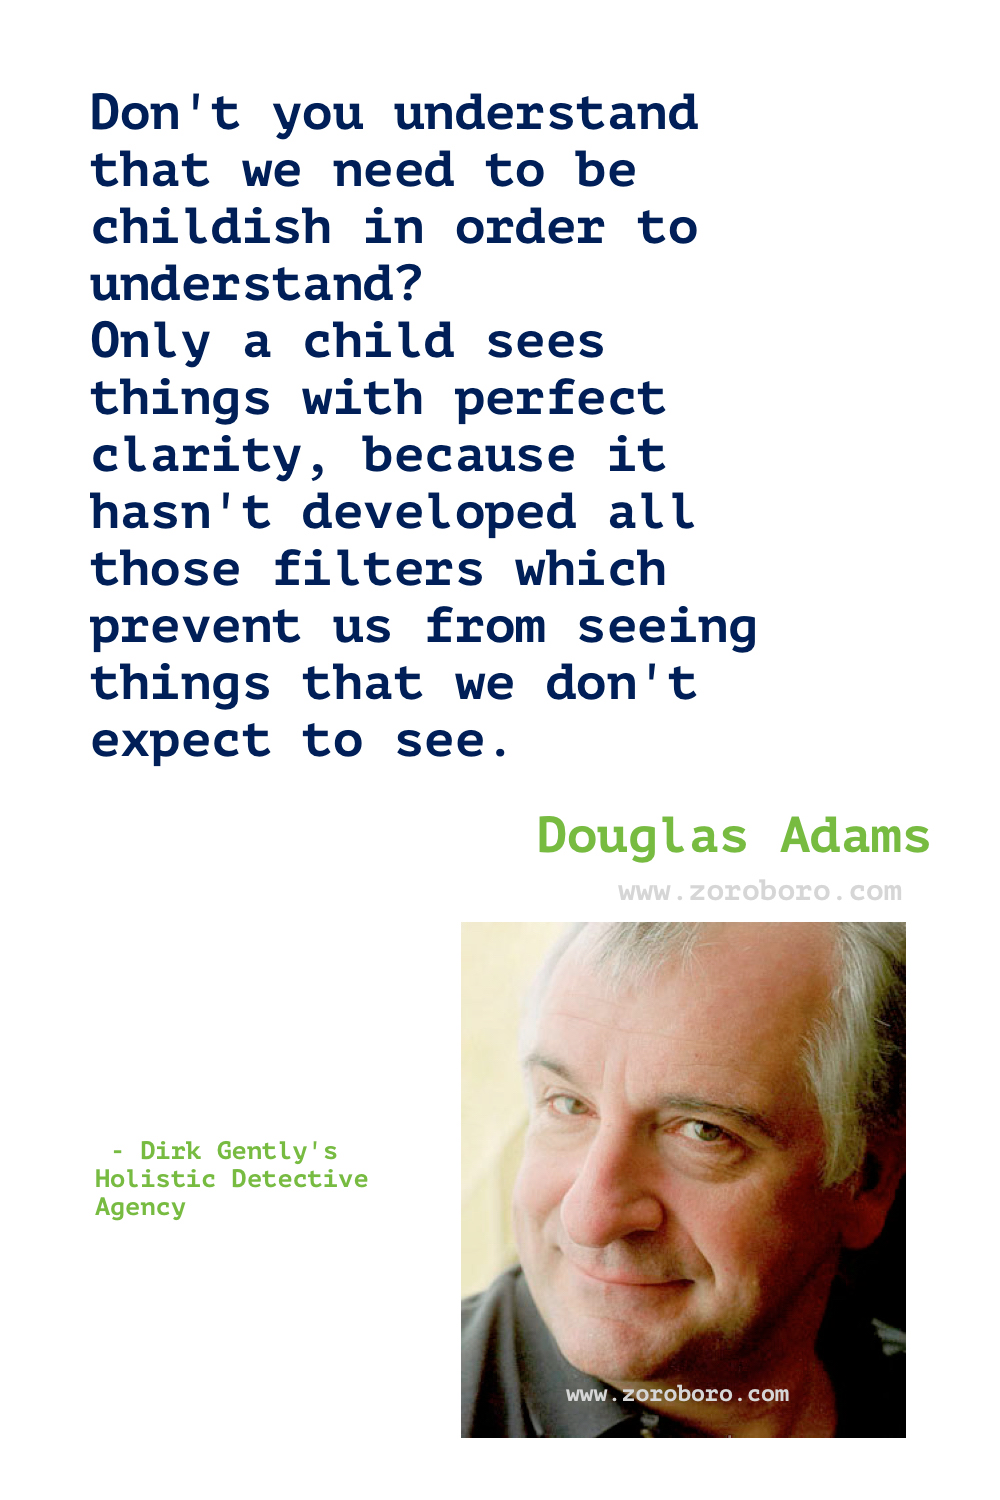 Douglas Adams Quotes, Douglas Adams Books Quotes, Douglas Adams The Hitchhiker's Guide to the Galaxy. Douglas Adams Quotes, Mostly Harmless, The Salmon of Doubt Quotes.